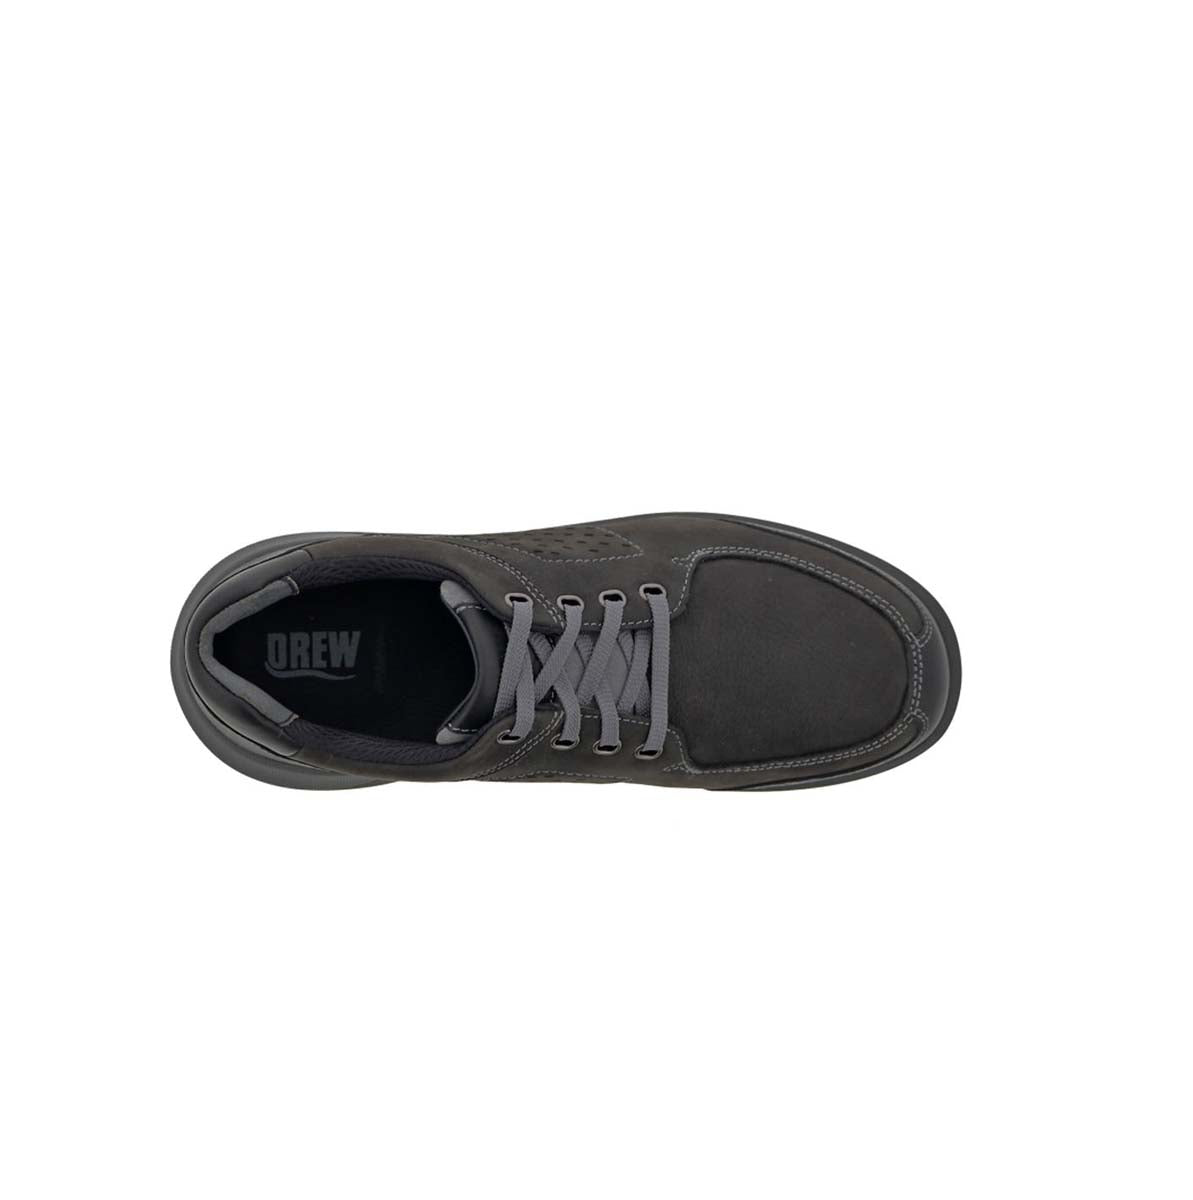 DREW MILES MEN CASUAL SHOE IN BLACK NUBUCK/LEATHER - TLW Shoes